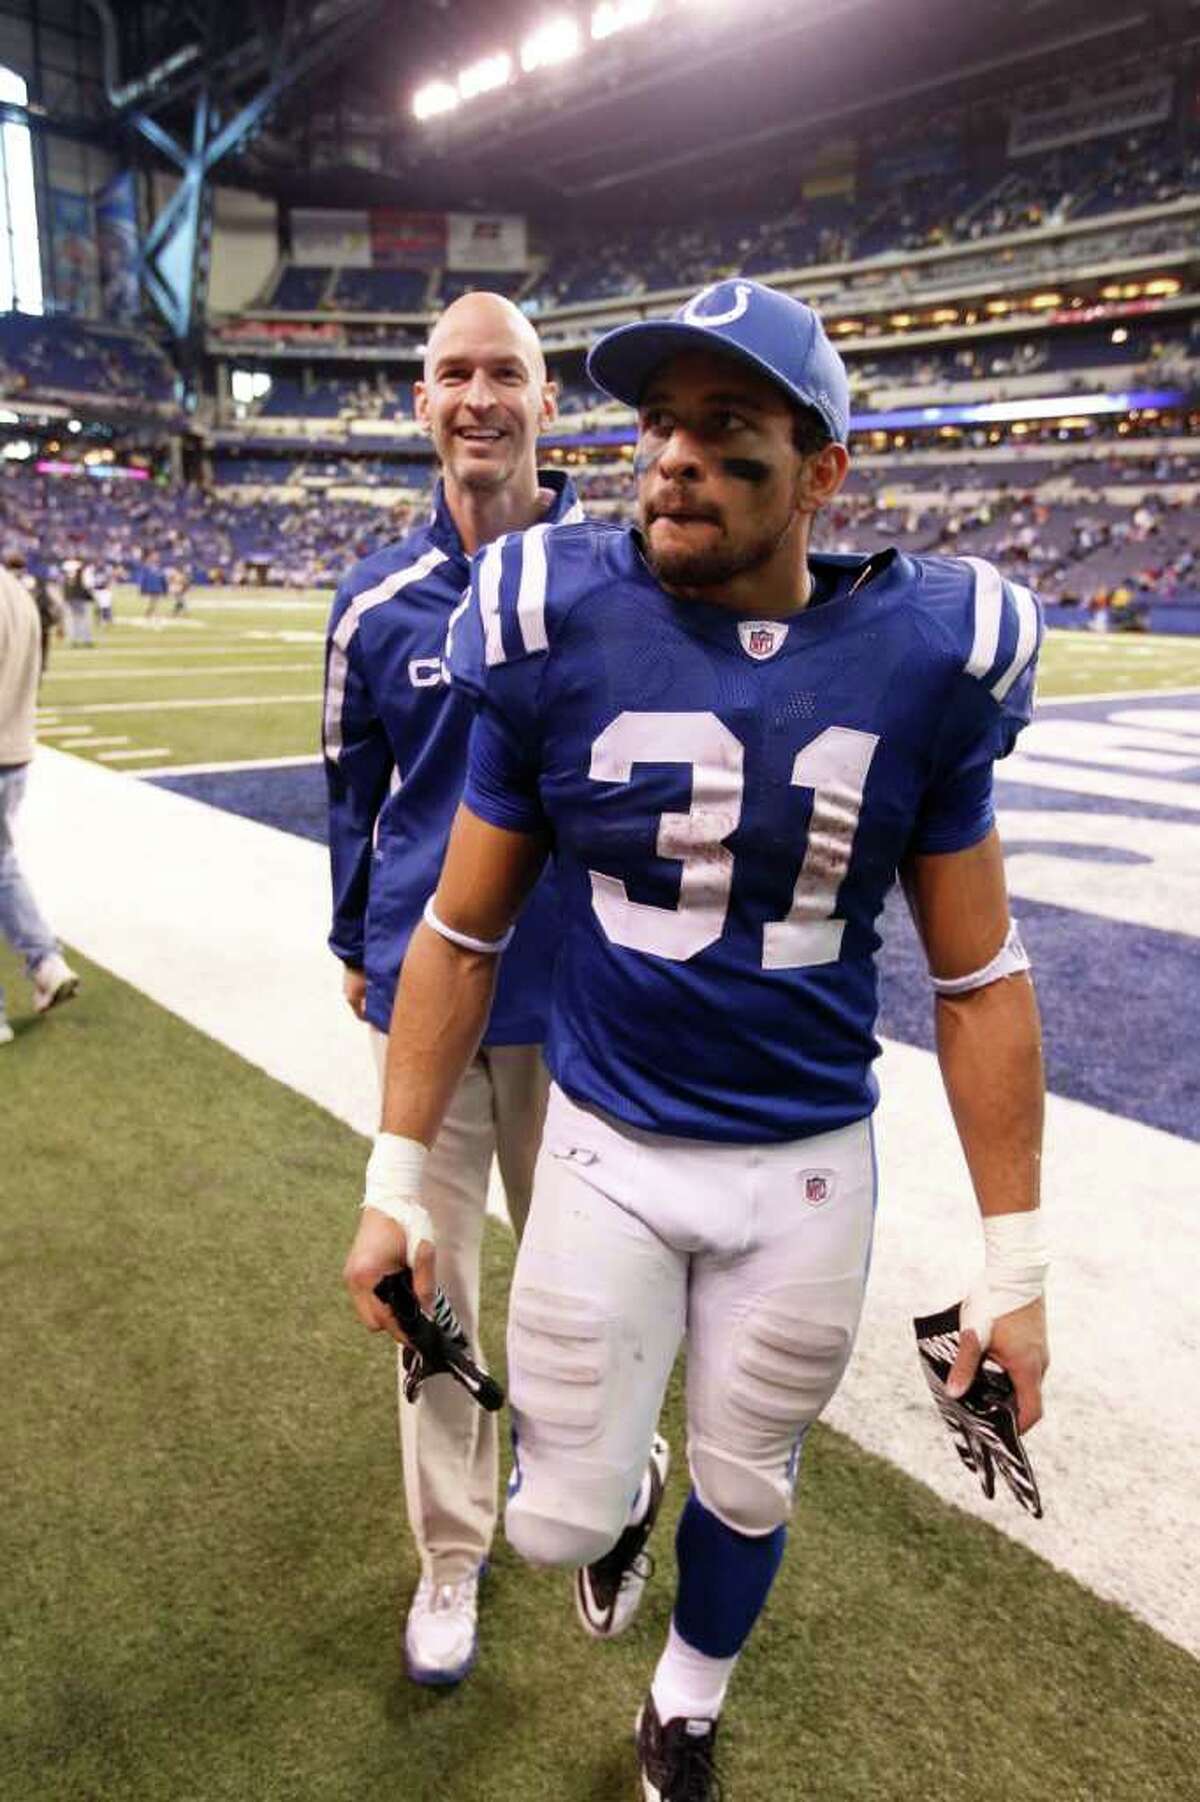 Indianapolis Colts running back Donald Brown leaves the field after the team's first win of the season in an NFL football game in Indianapolis, Sunday, Dec. 18, 2011. The Colts won 27-13. (AP Photo/Michael Conroy)